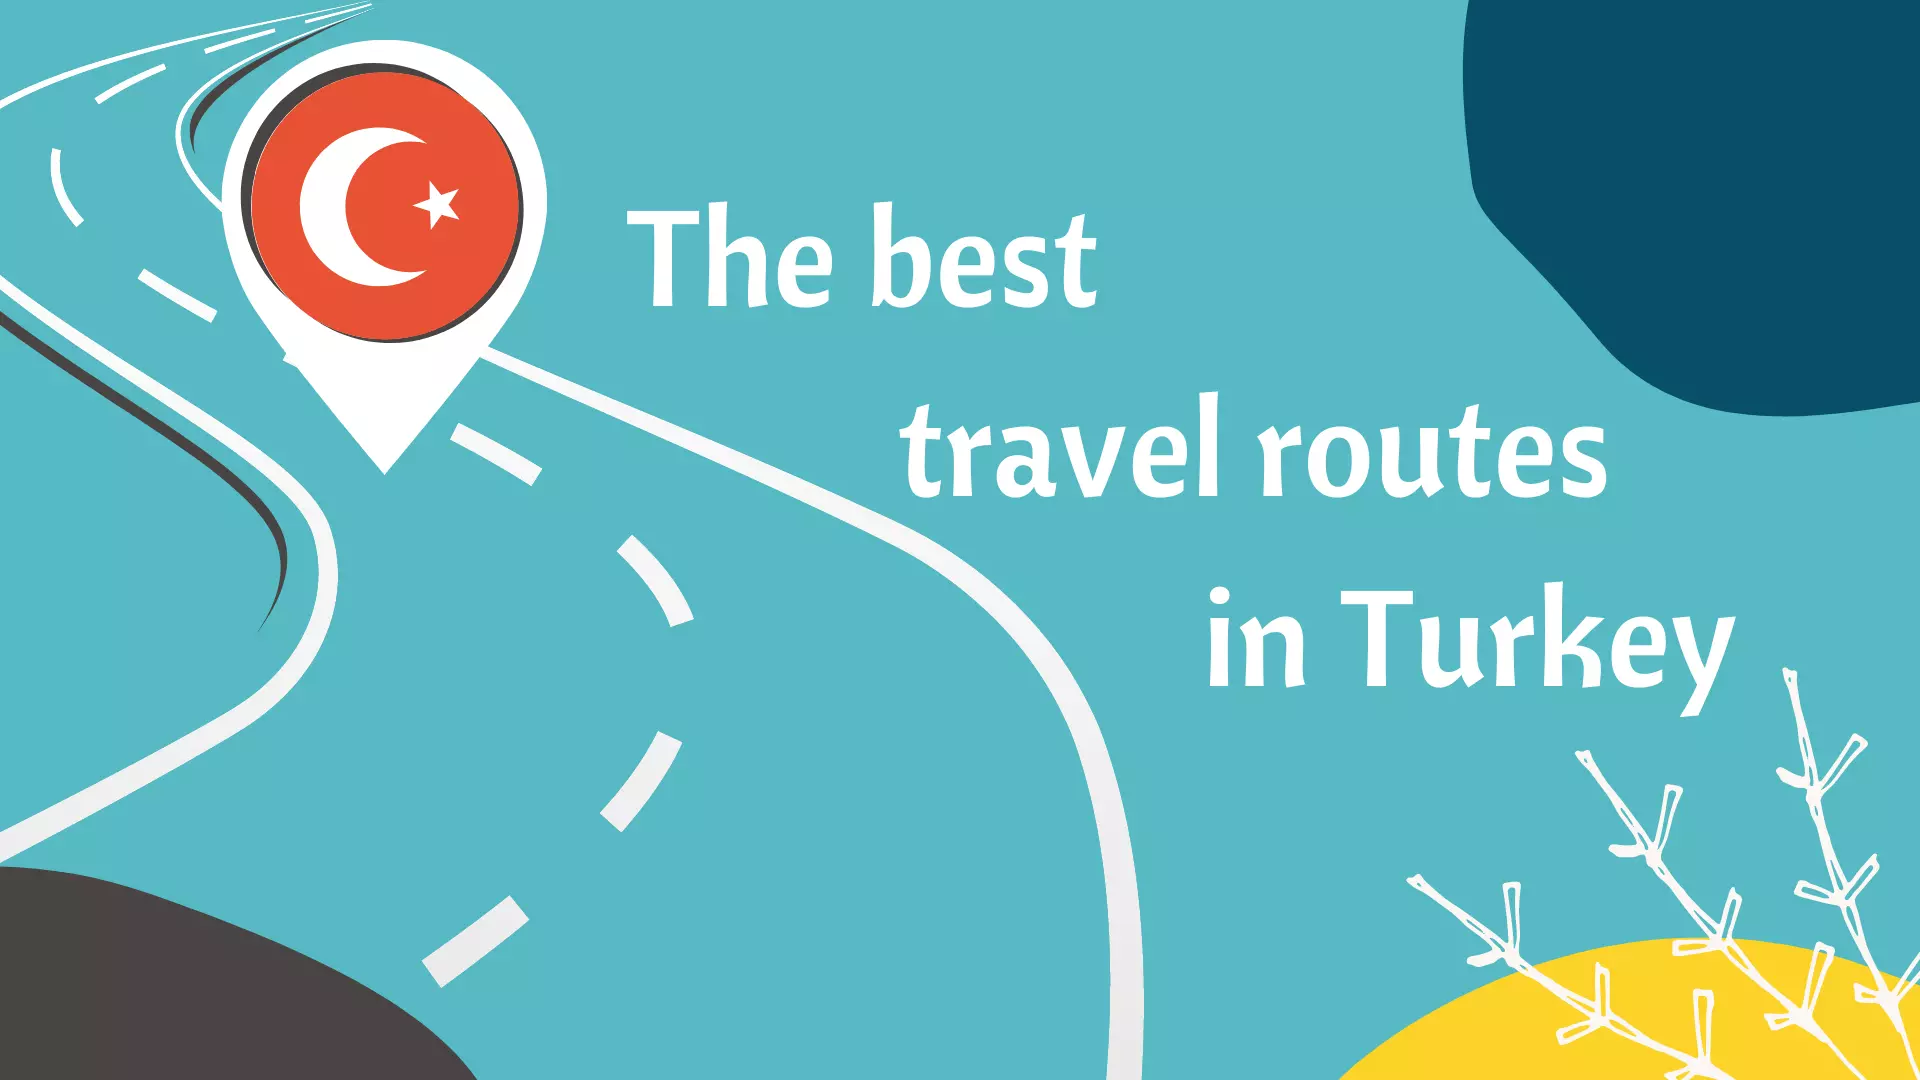 What are the best travel routes in Turkey?